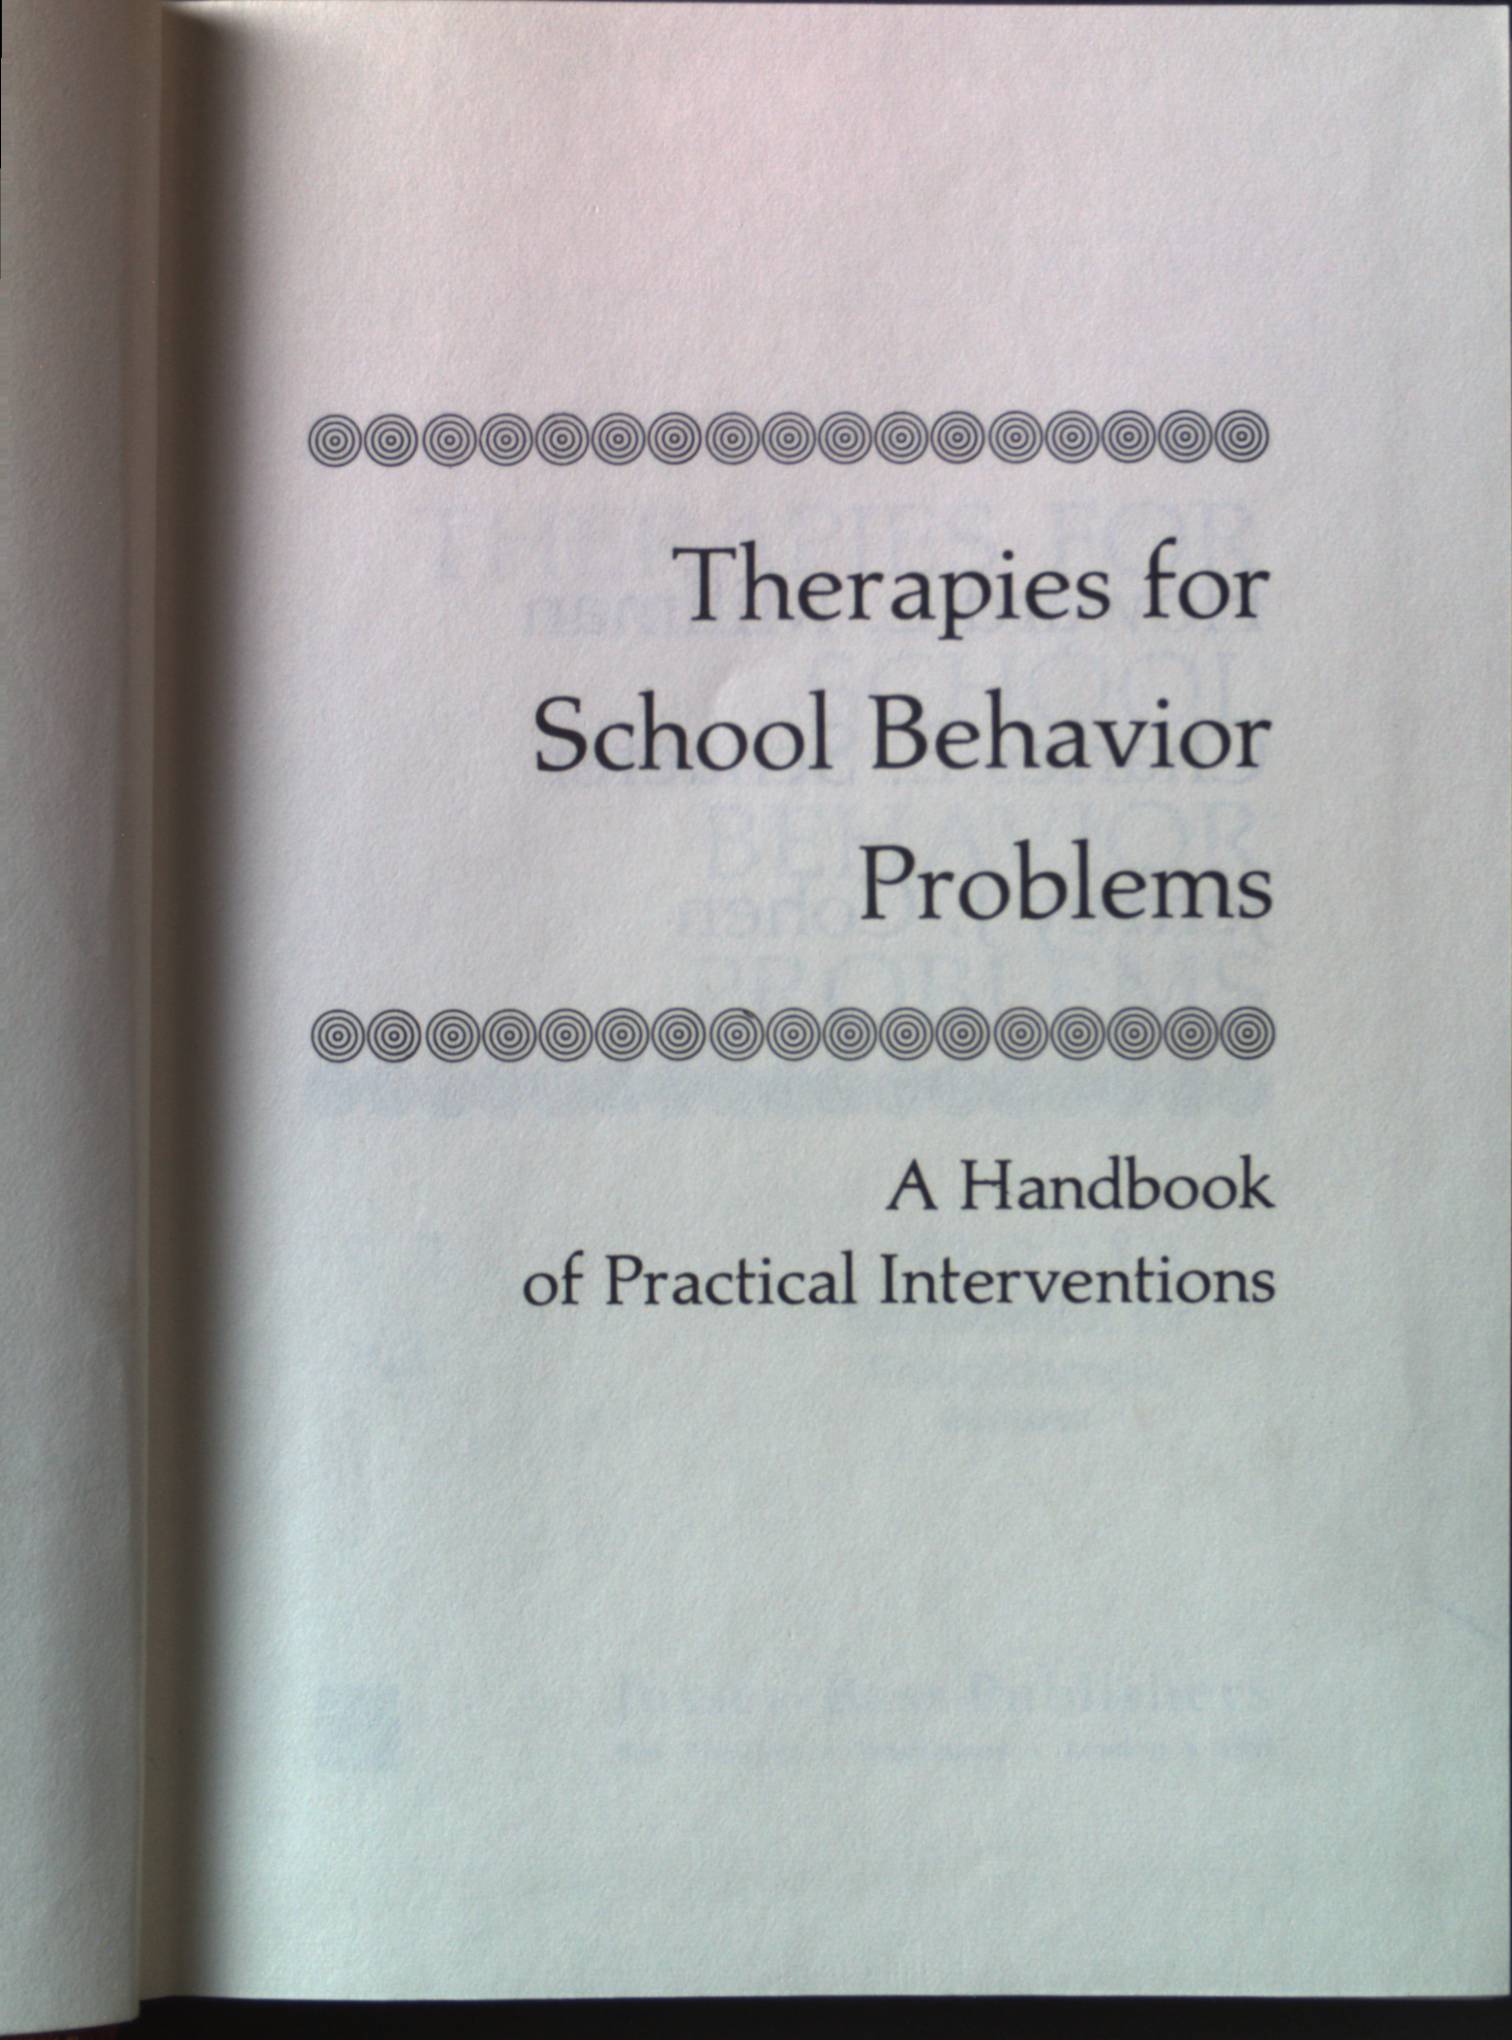 Therapies for School Behavior Problems: Handbook of Practical Interventions (The Jossey-Bass Social and Behavioral Science Series) - Millman, Howard L., Charles E. Schaefer and Jeffrey J. Cohen